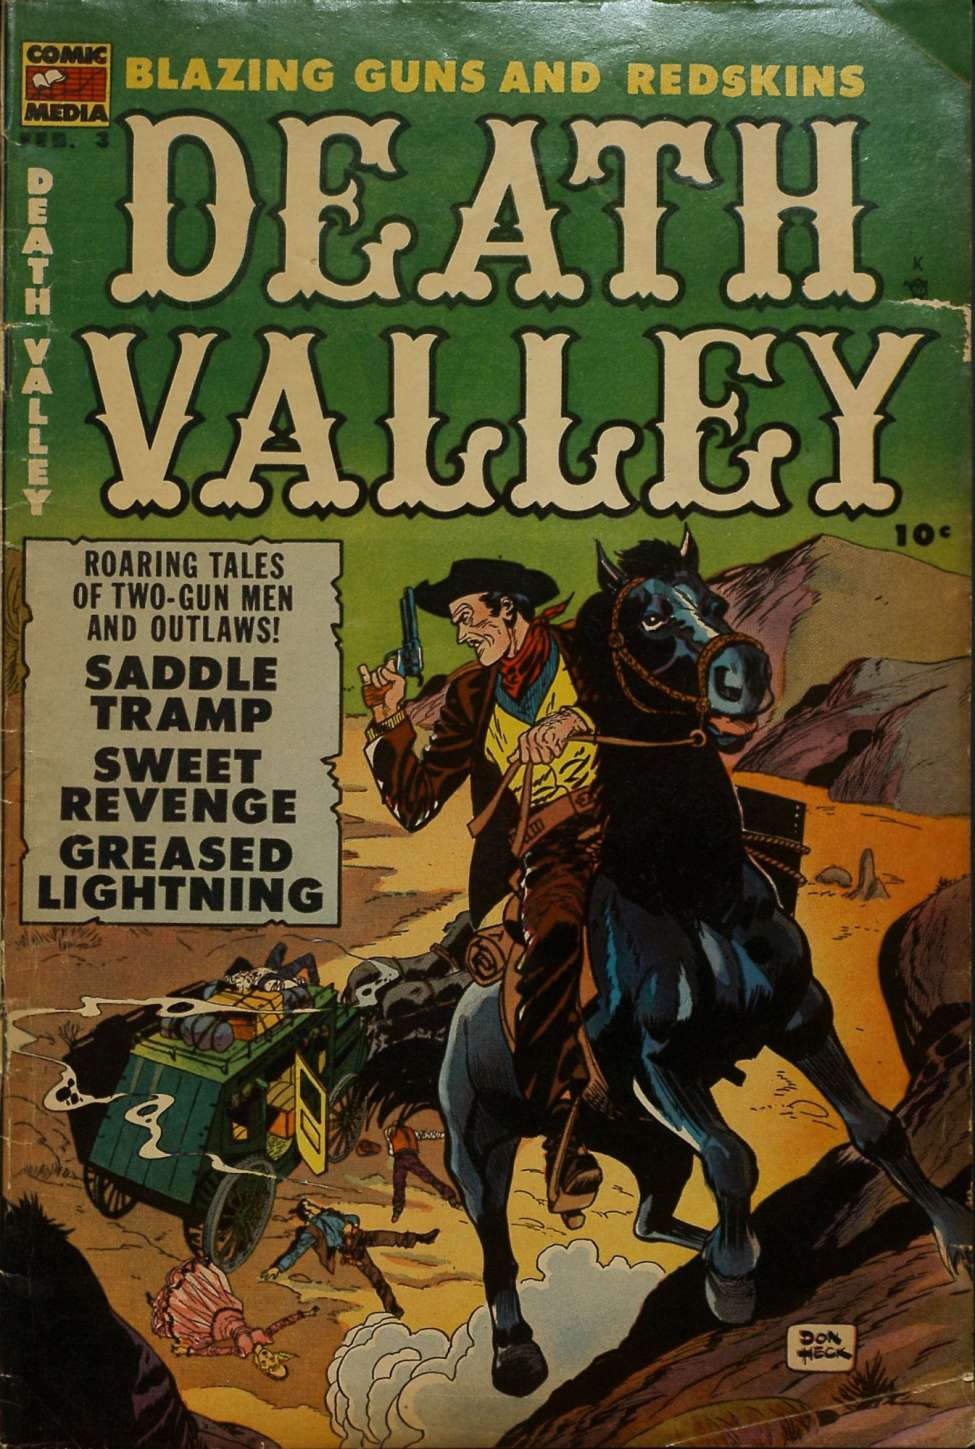 Comic Book Cover For Death Valley 3